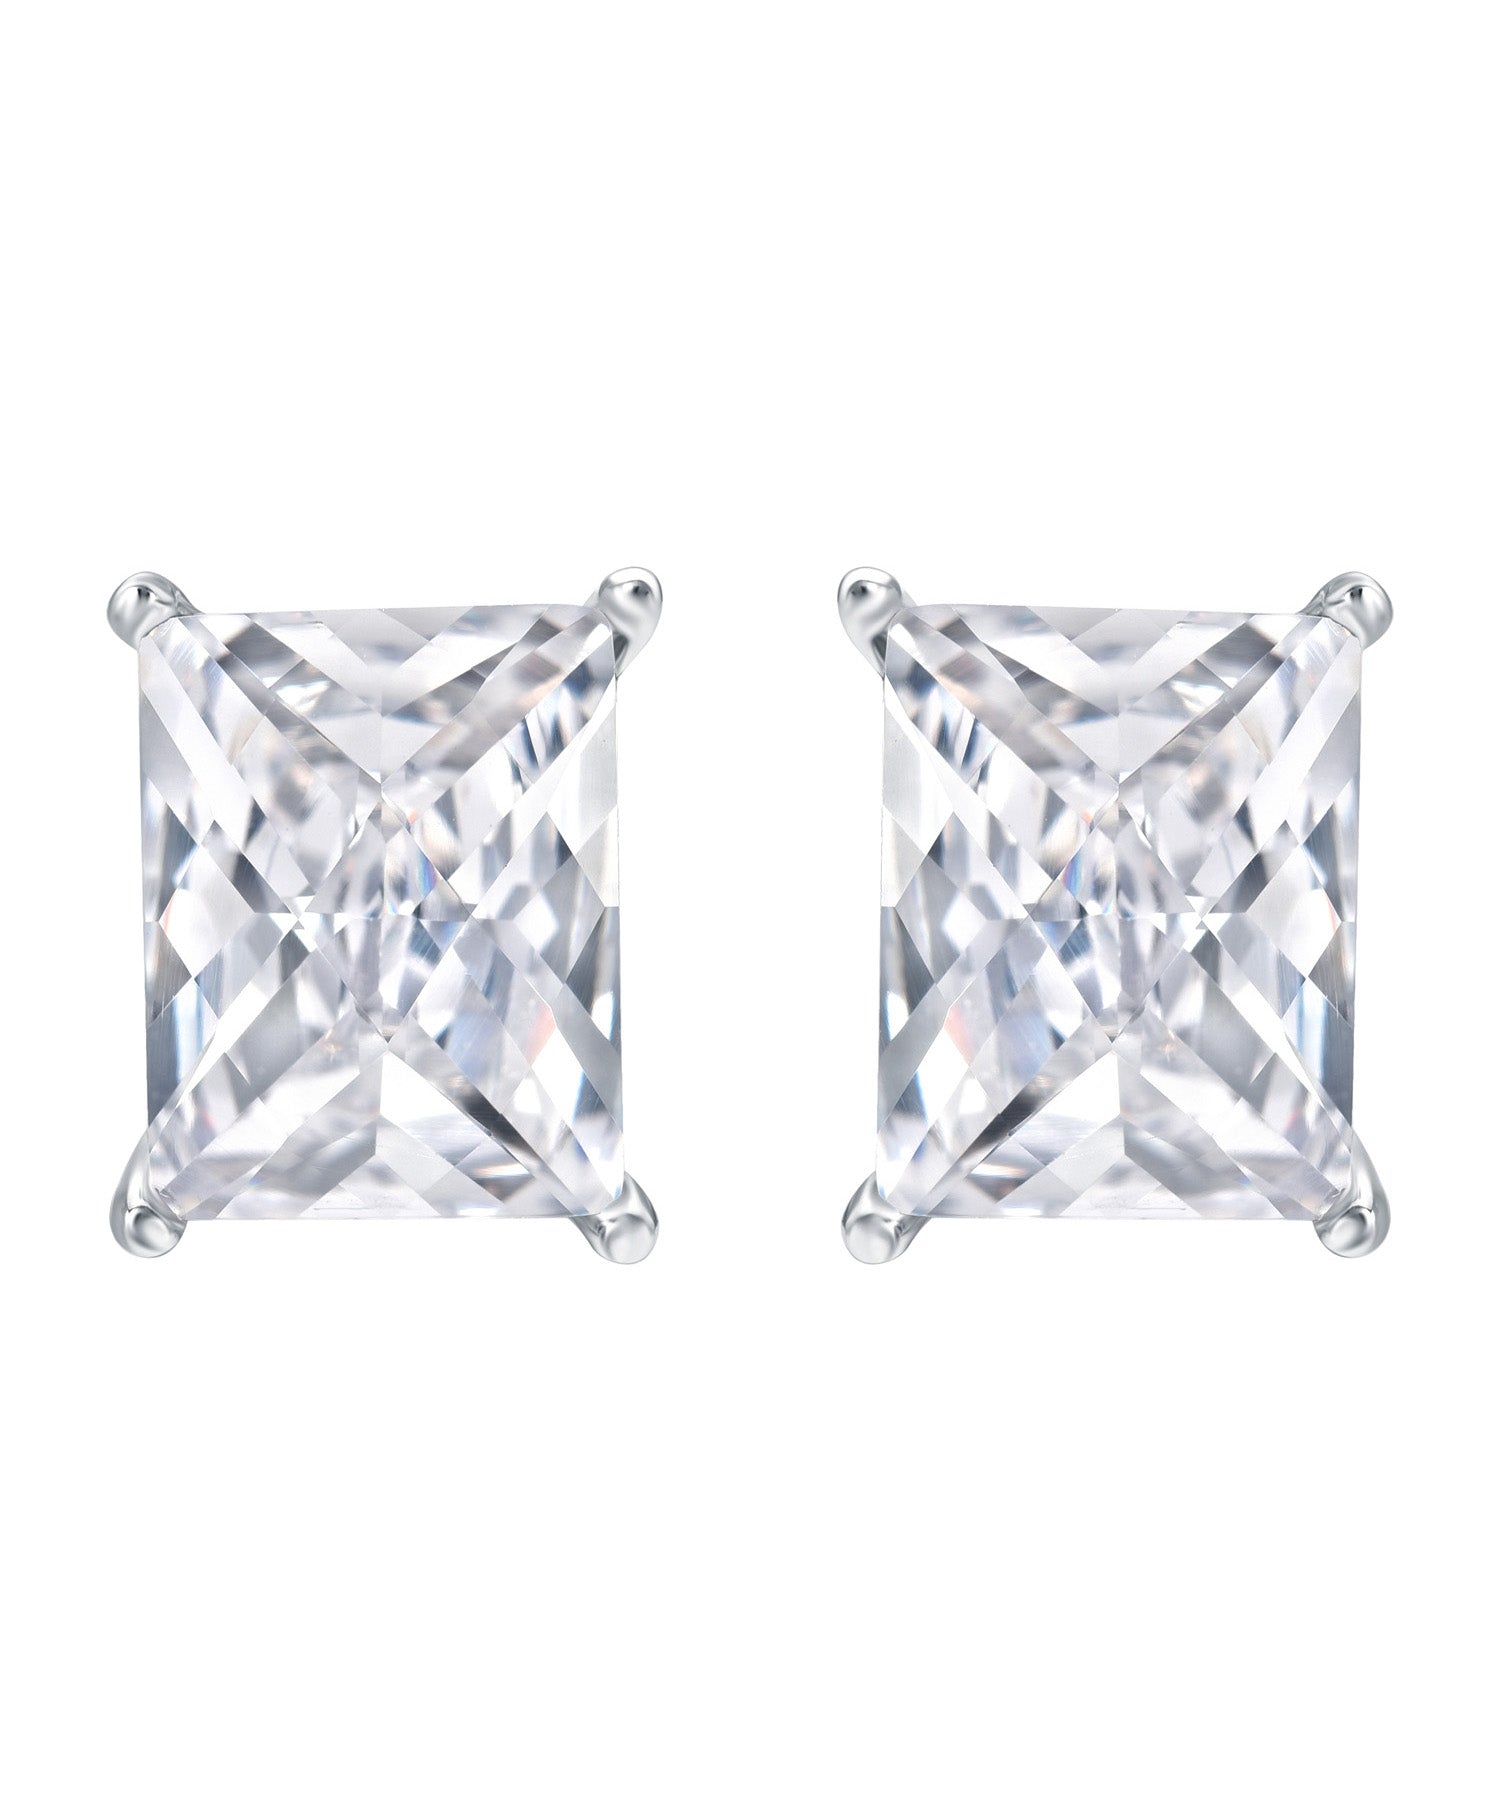 Checkerboard Cut Cubic Zirconia Rhodium Plated 925 Sterling Silver Stud Earrings View 1